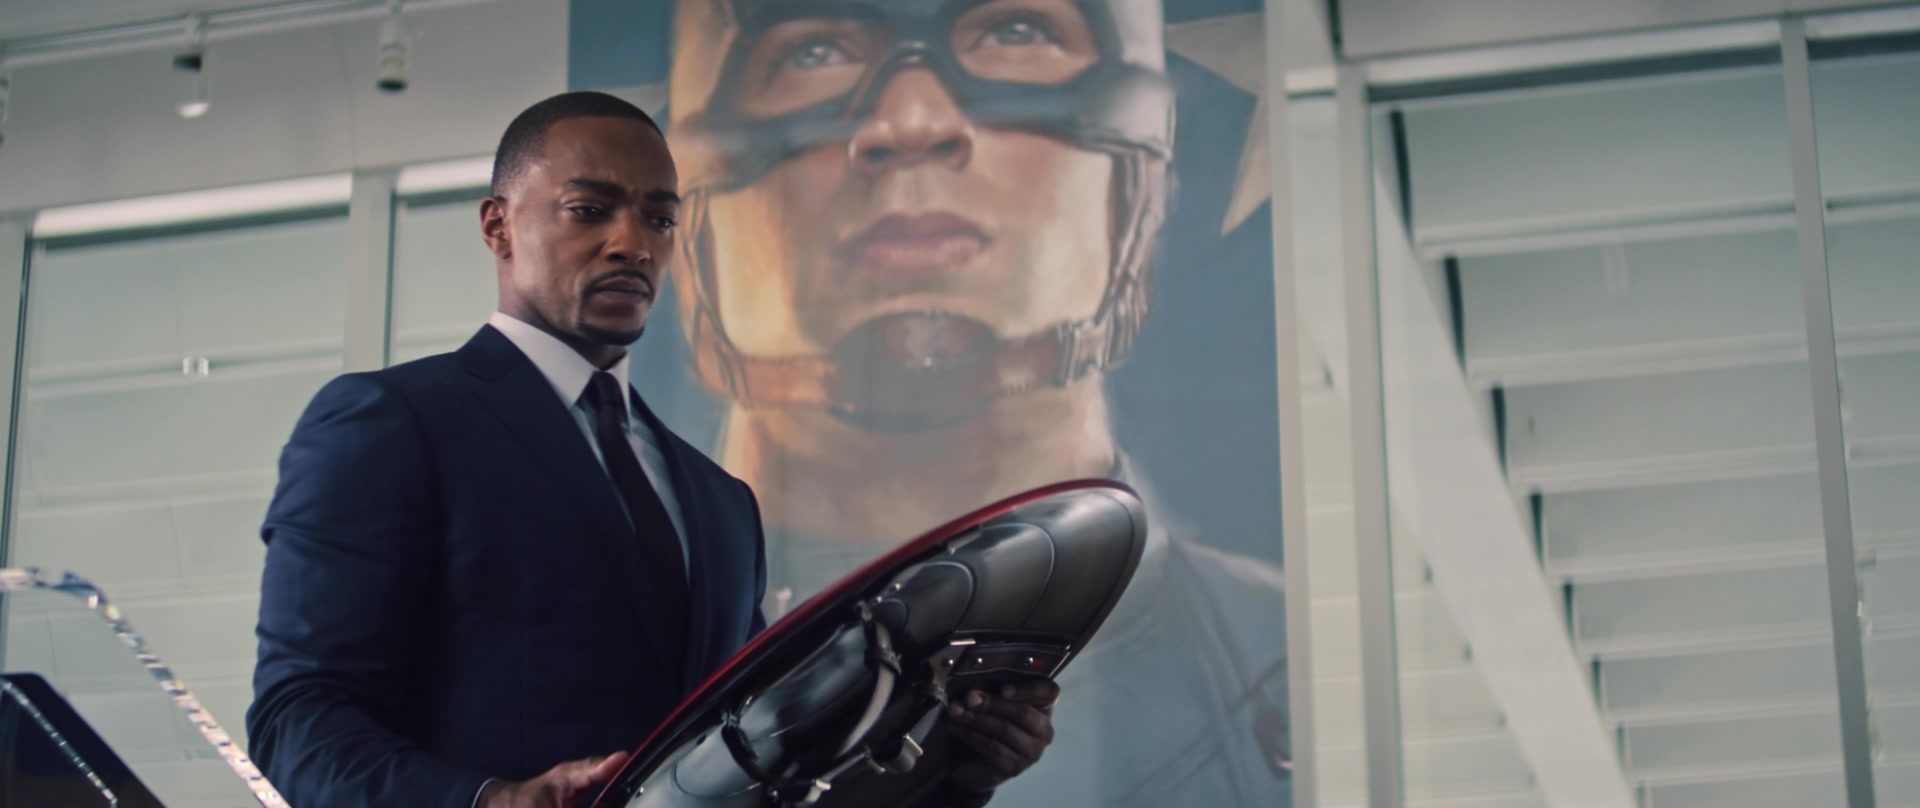 Sam Wilson (Anthony Mackie) reflects the weight of the Captain America mantle in The Falcon and the Winter Soldier Season 1 Episode 1 "New World Order" (2021), Marvel Entertainment